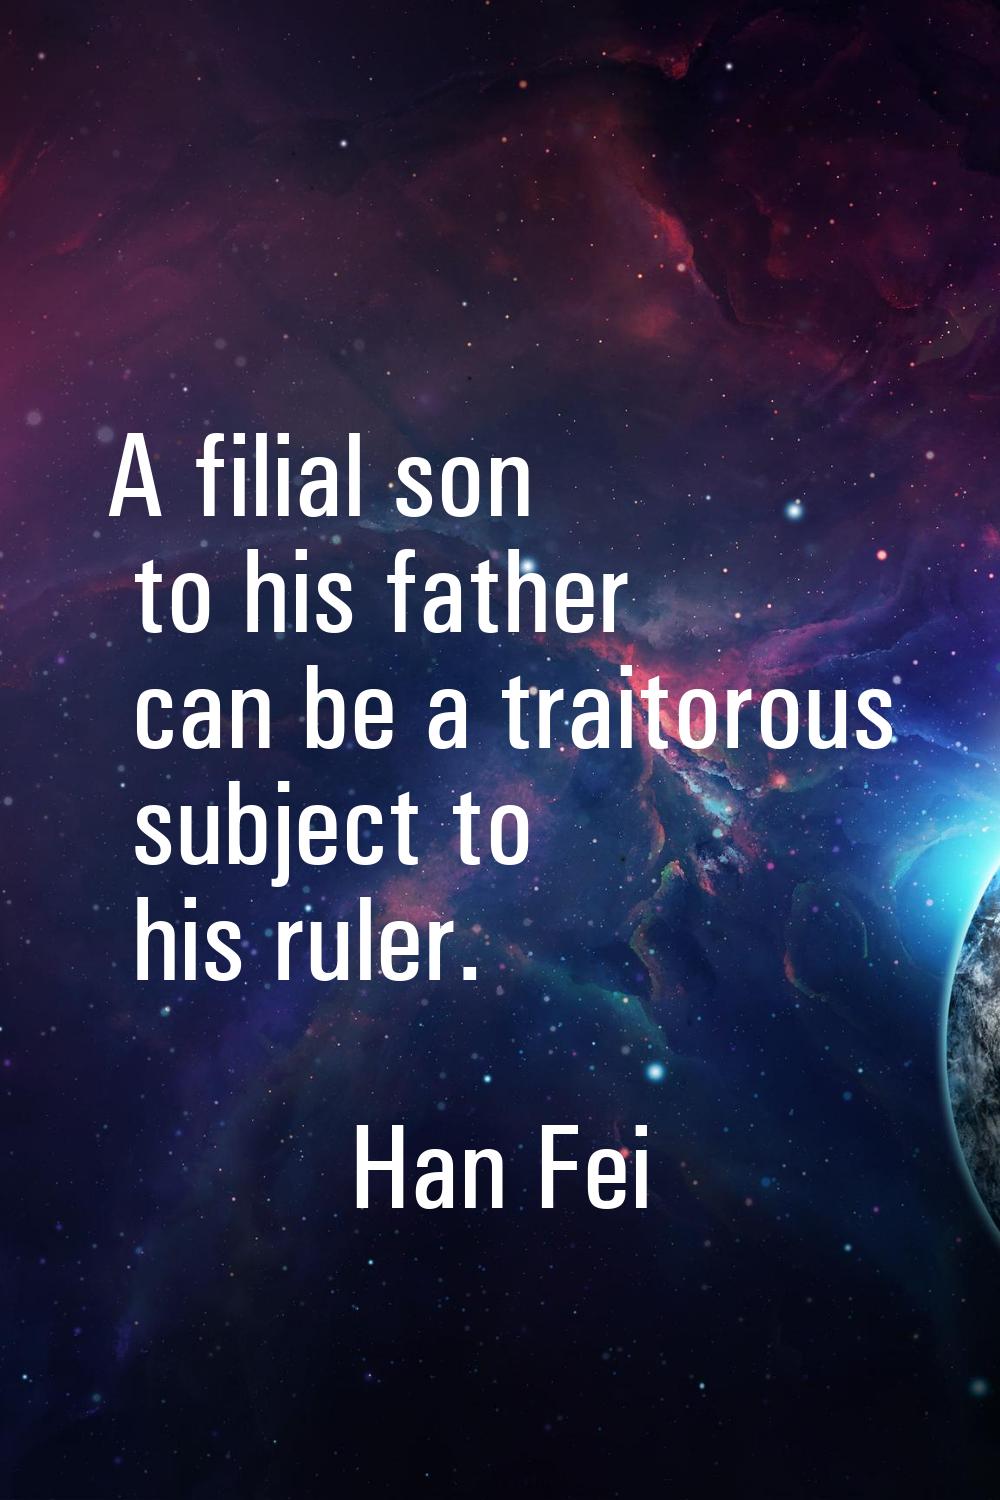 A filial son to his father can be a traitorous subject to his ruler.